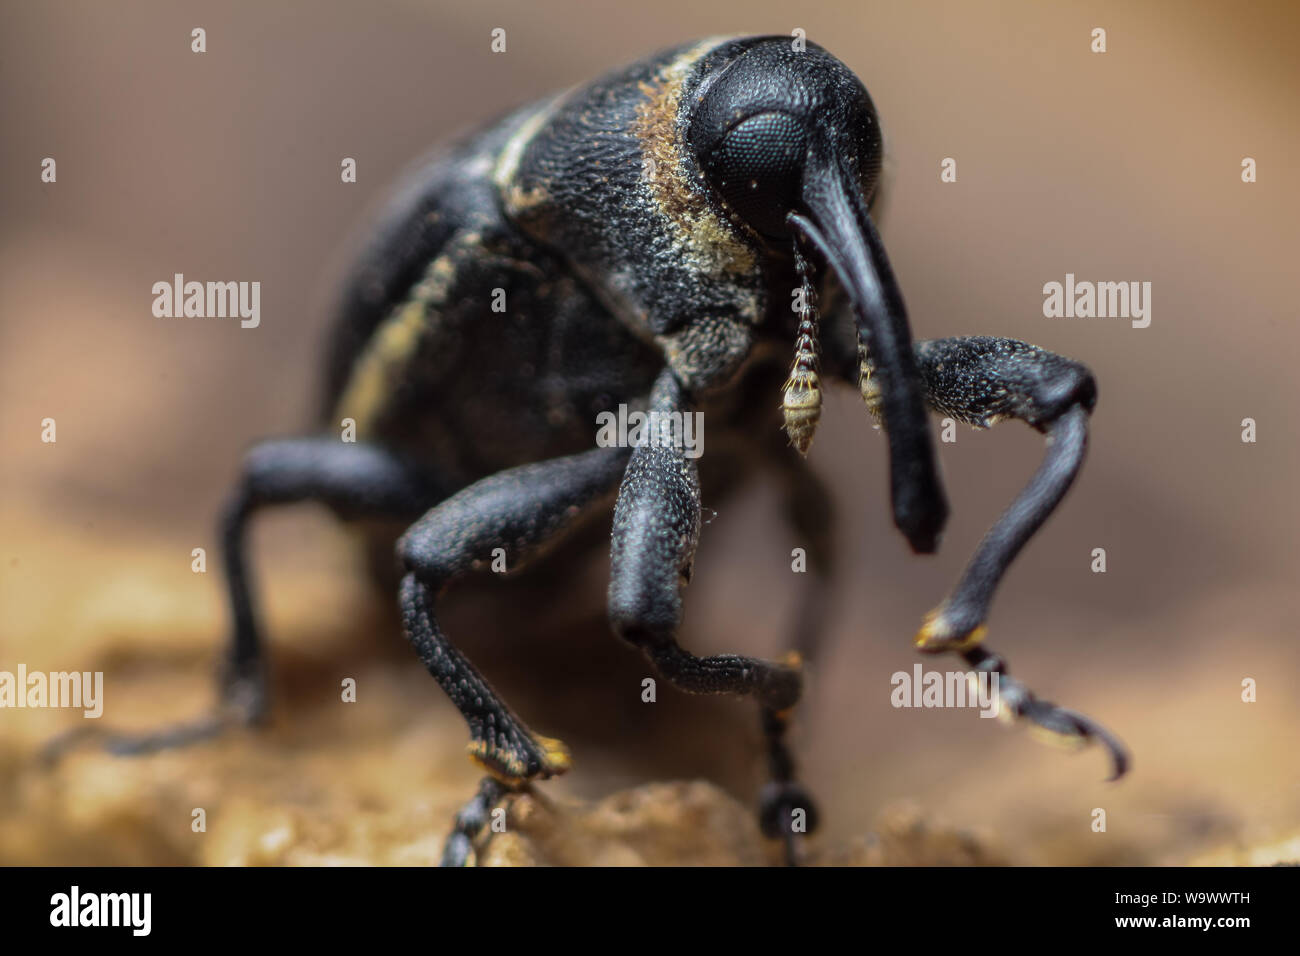 Close-up of a black weevil with long snout (Coleoptera, Curculionidae) Stock Photo